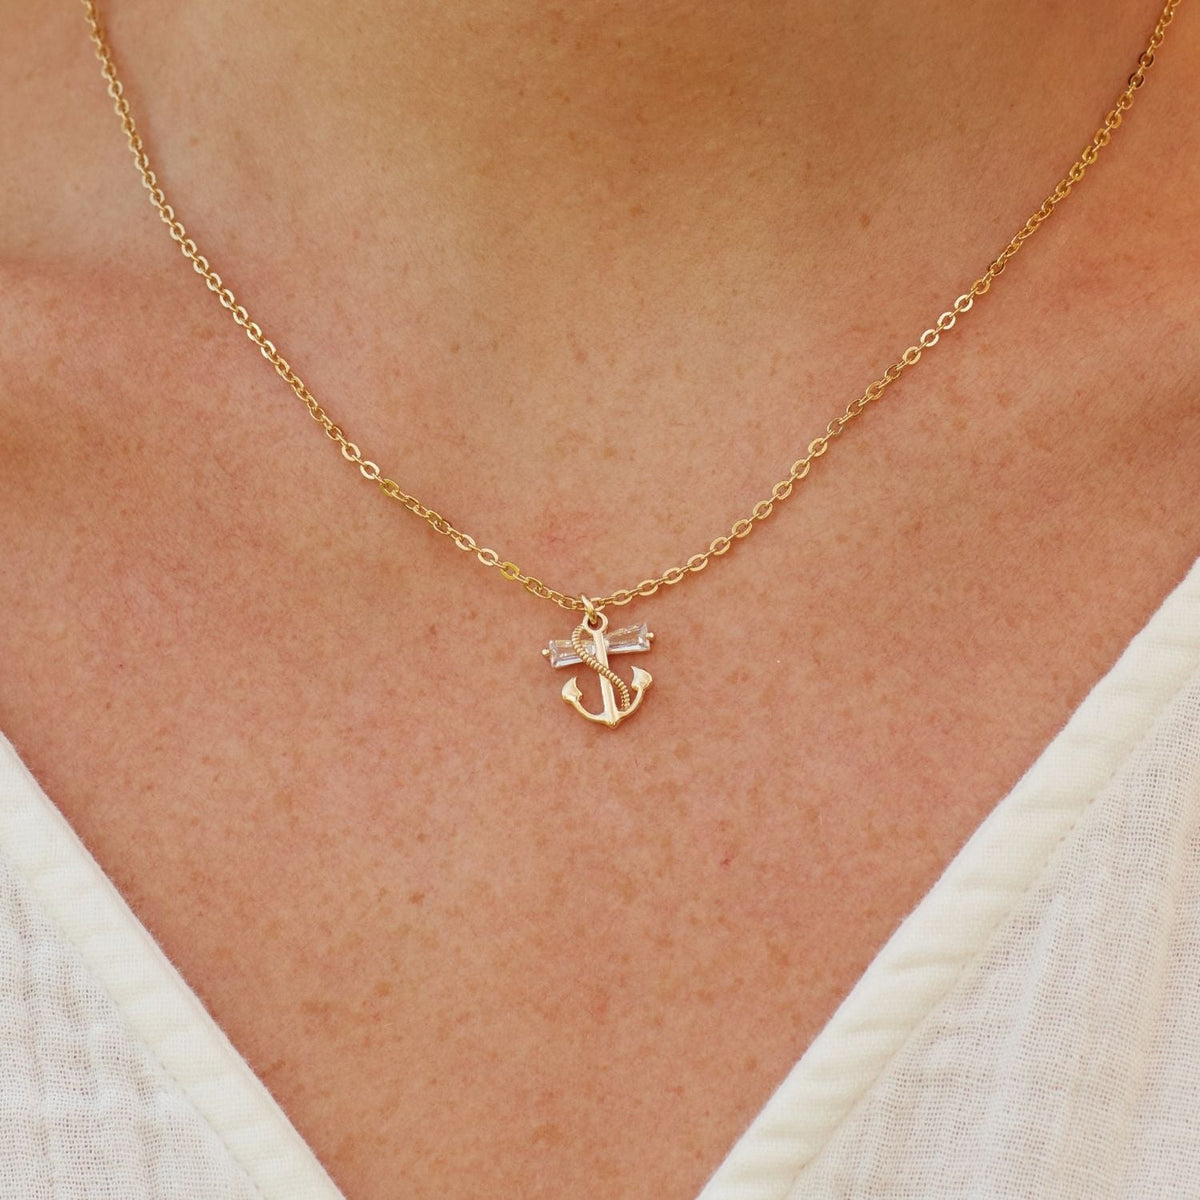 To An Amazing New Mom | Future Worth Living For | Anchor Necklace